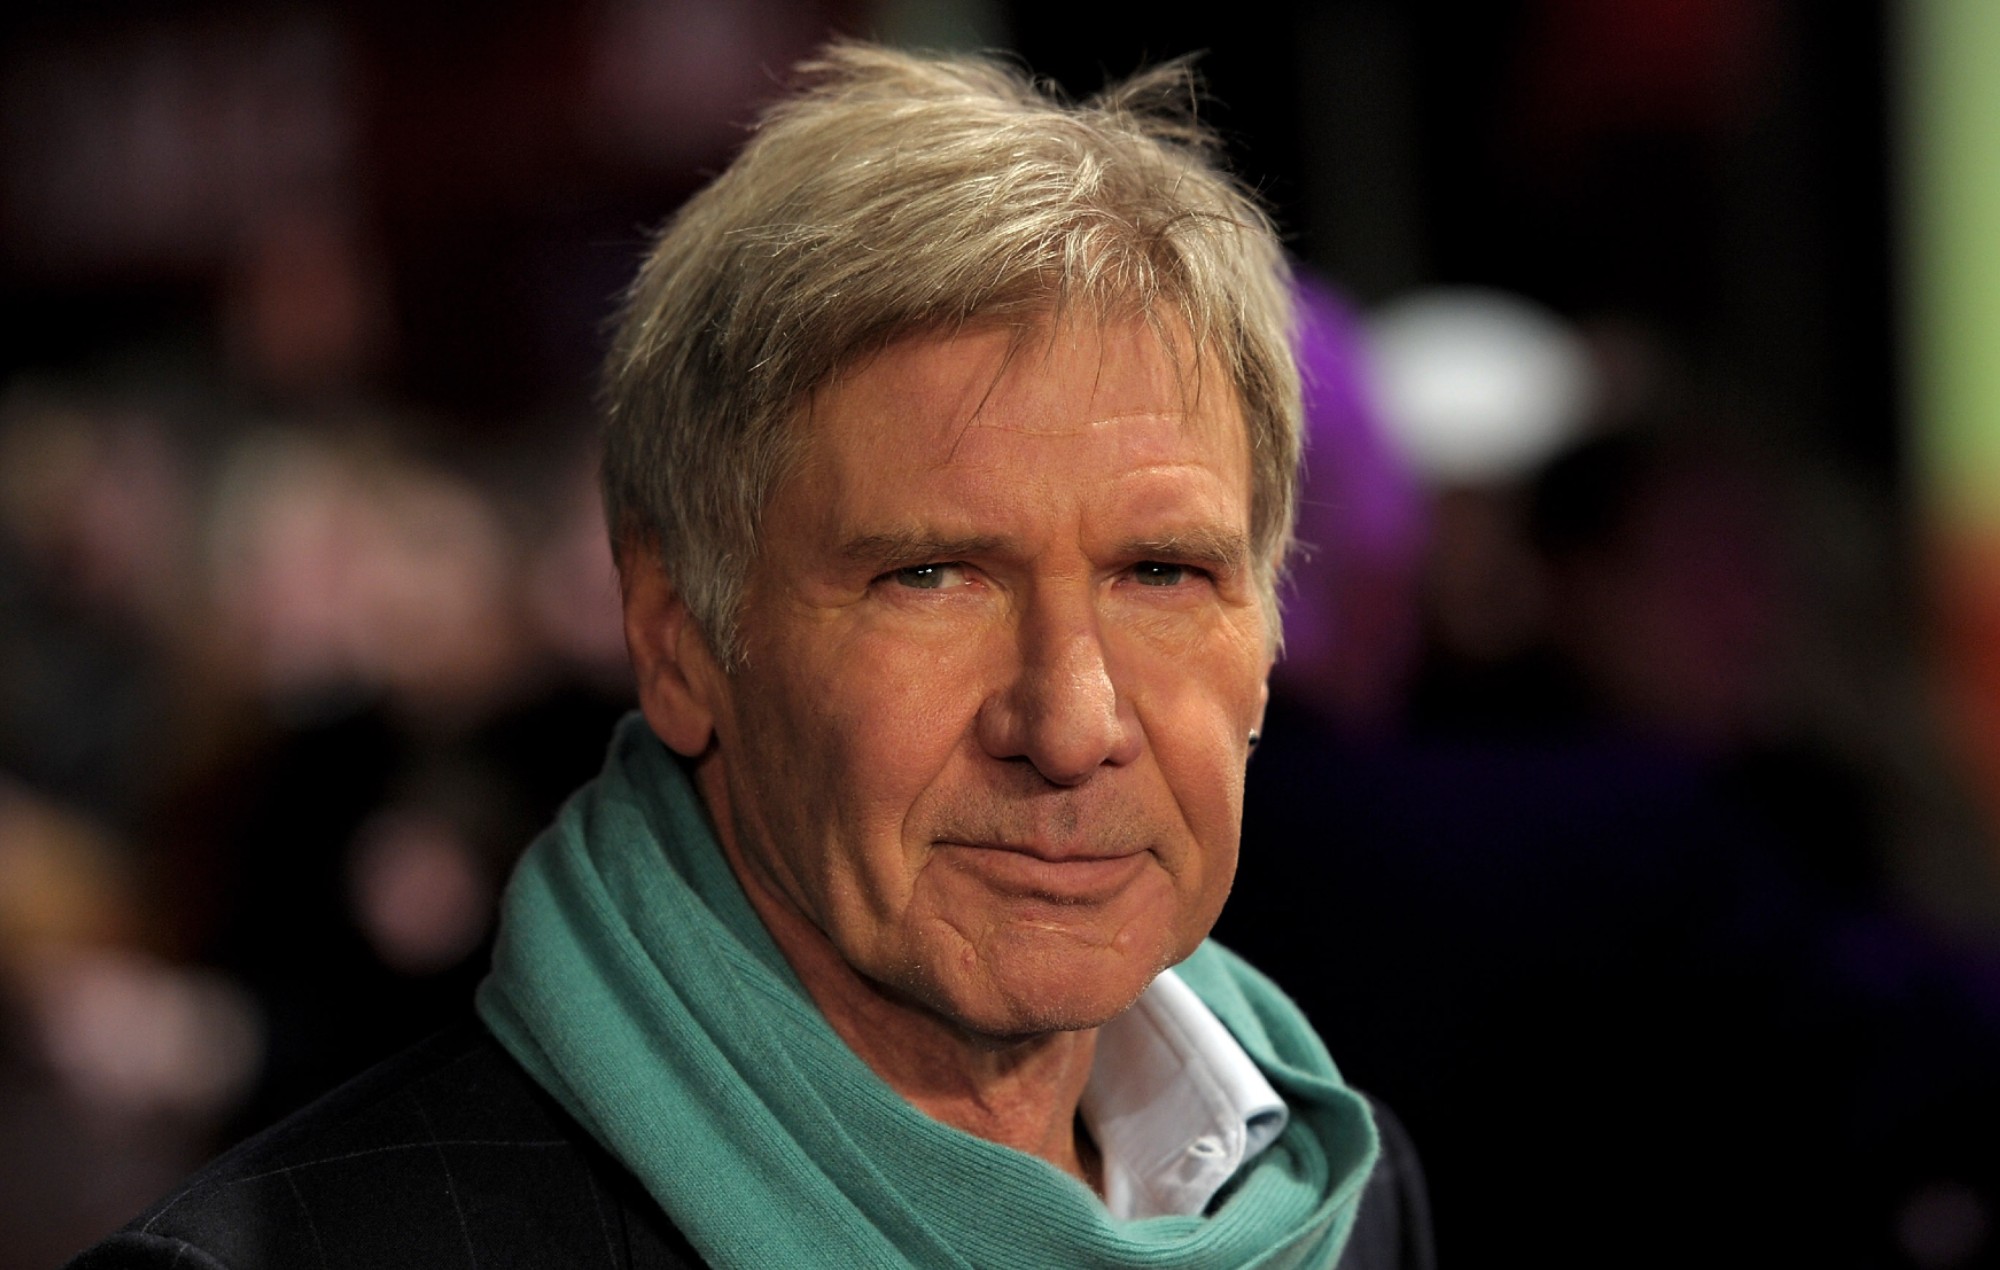 Harrison Ford recalls rescuing stranded hiker in his helicopter: “She barfed in my cowboy hat”